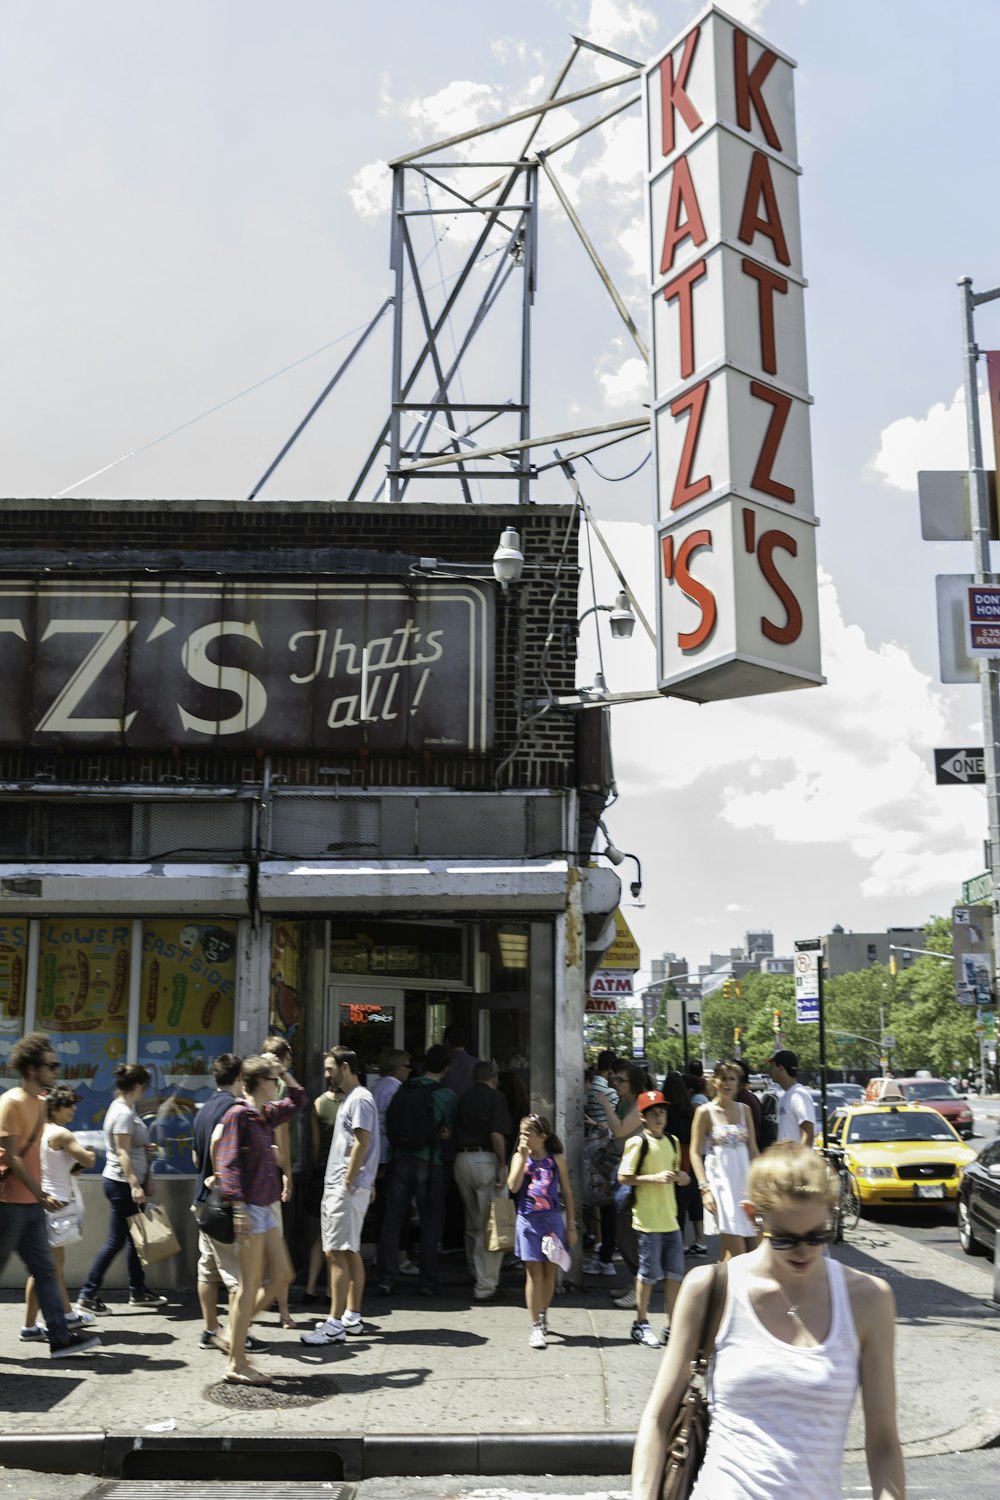 crowd in front of Katz's building during daytime